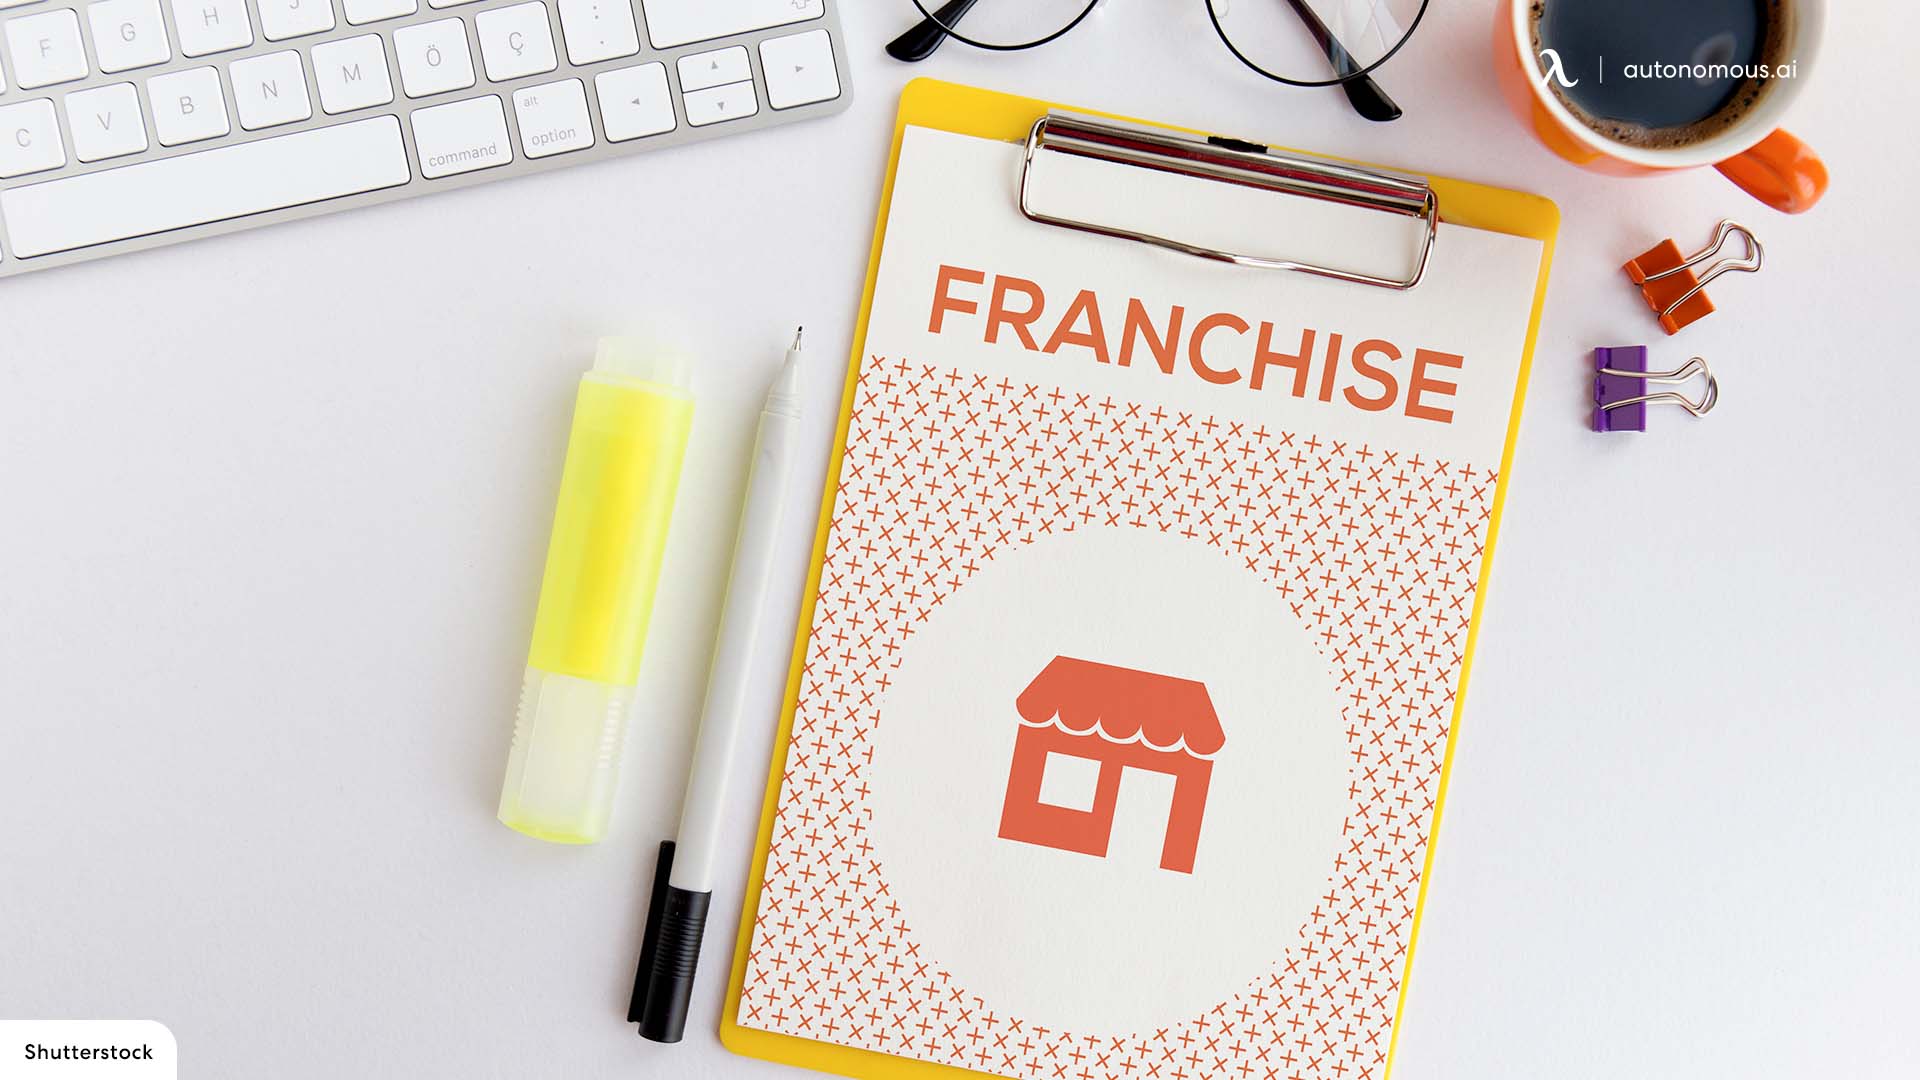 Opening a Franchise as small business ideas from home